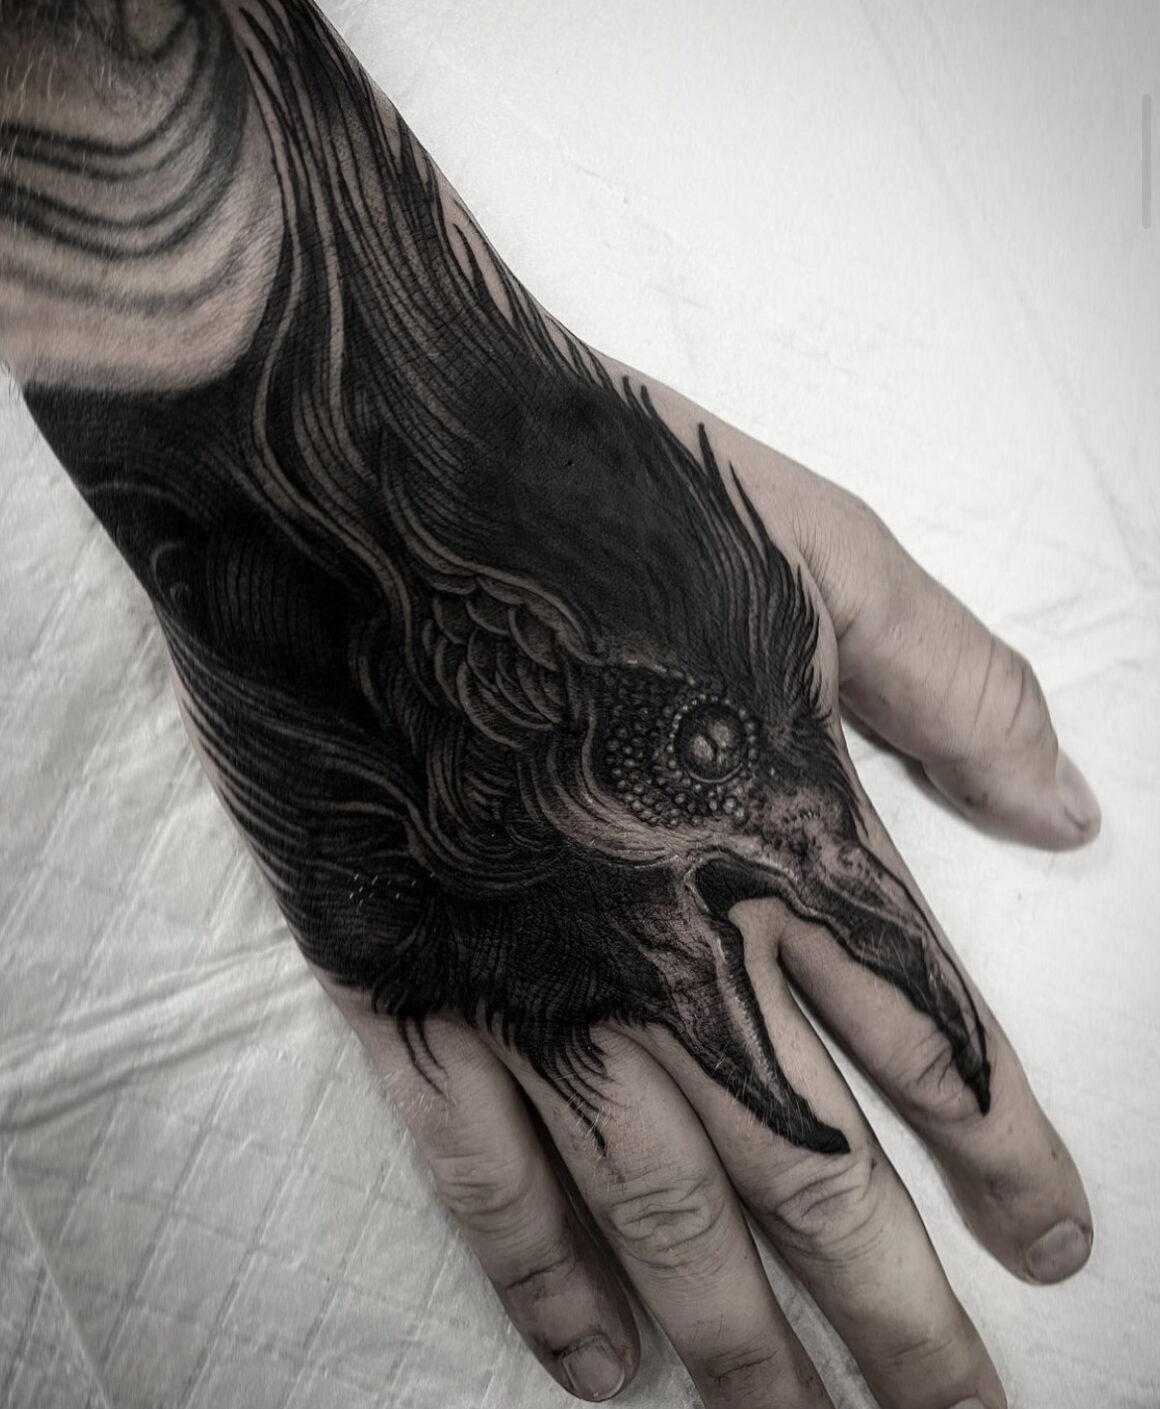 The Crow and its wealth of cultural and symbolic imagery in tattoos - Tattoo Life